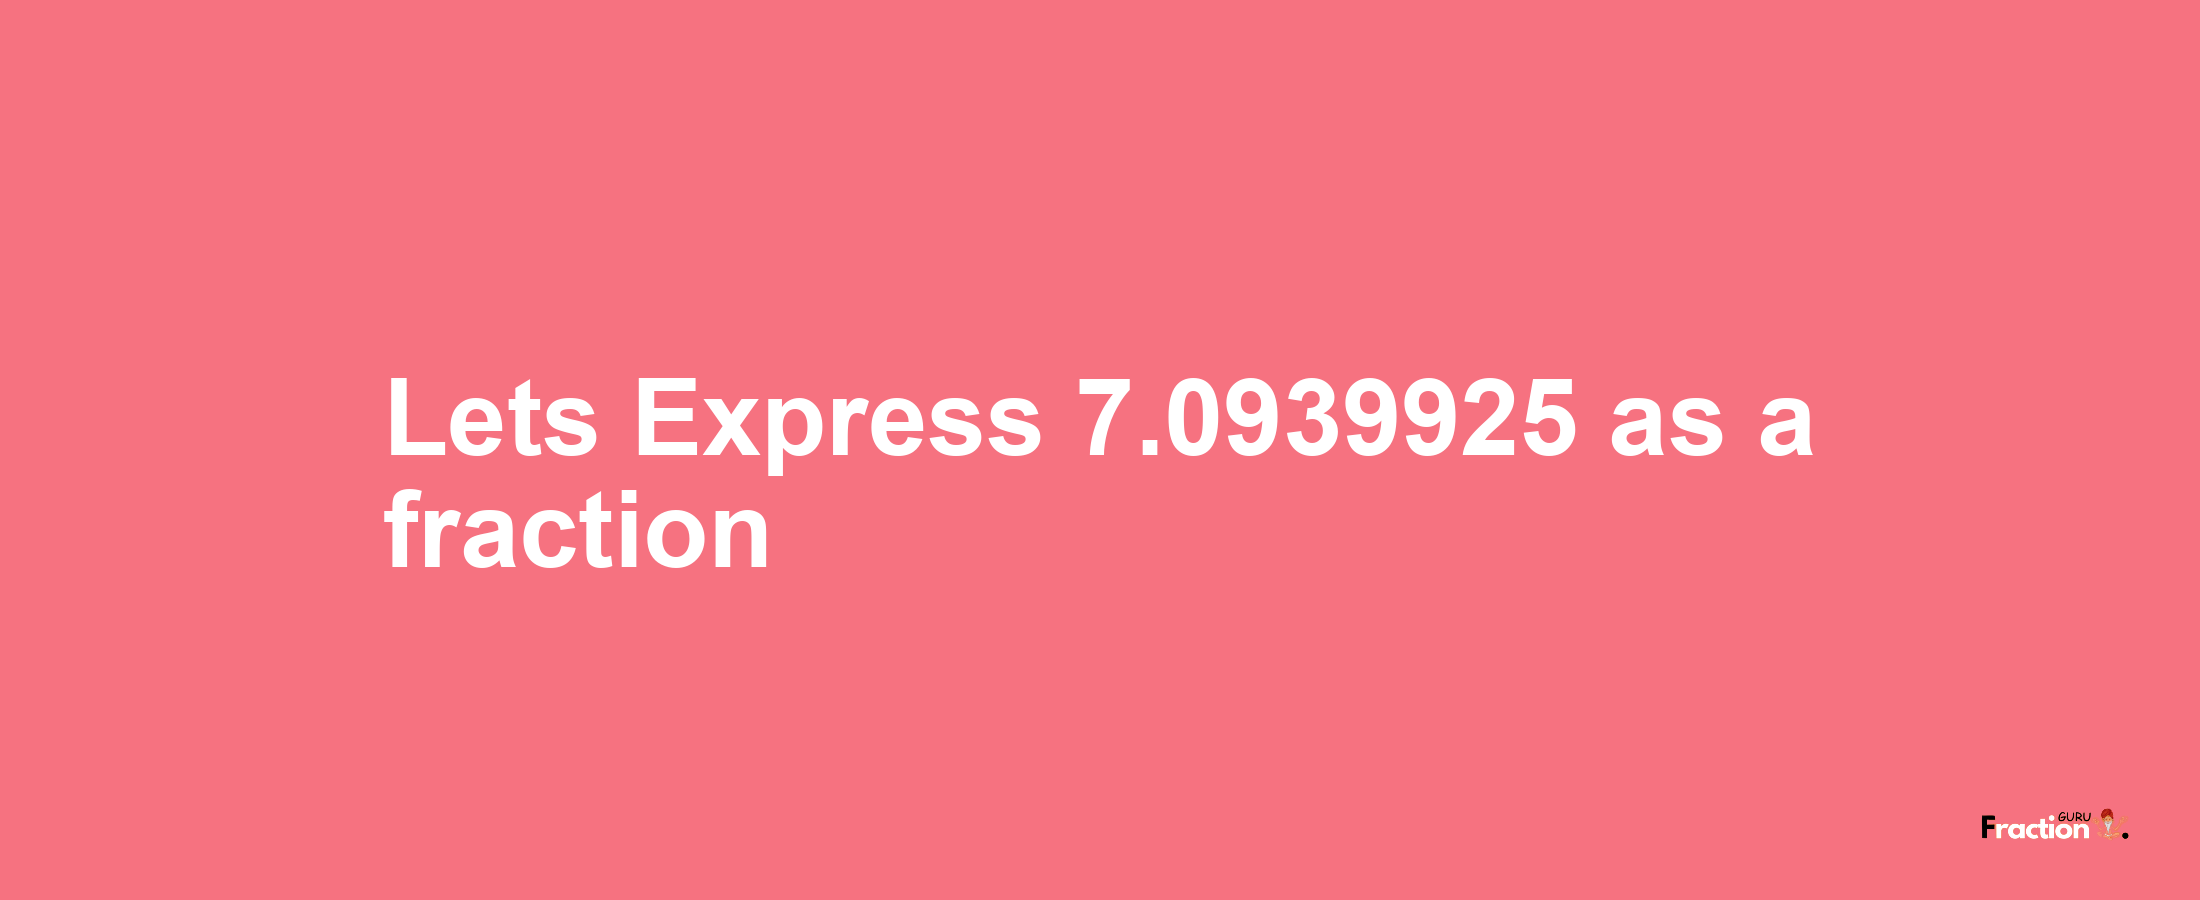 Lets Express 7.0939925 as afraction